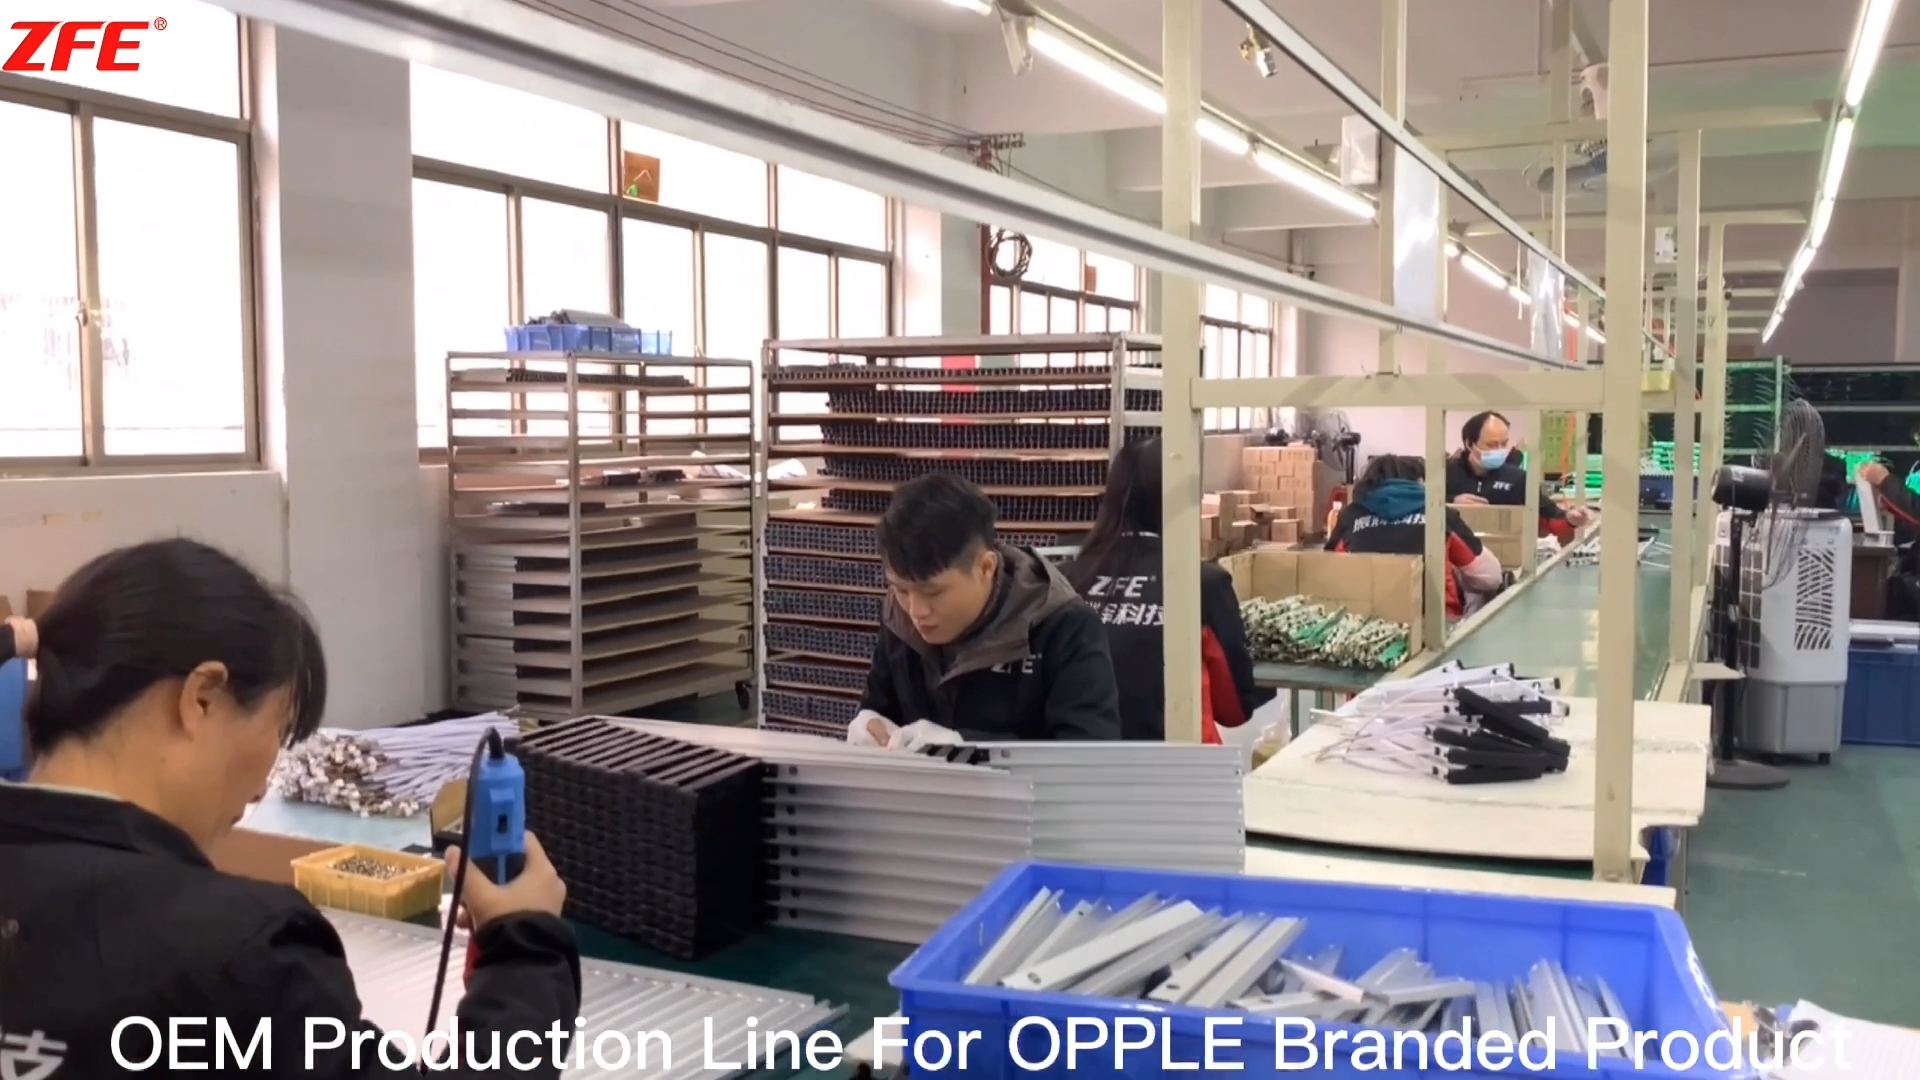 Customized OEM Production Line For OPPLE Branded Product-Manufactured by Guangdong Zhenhui Fire Technology